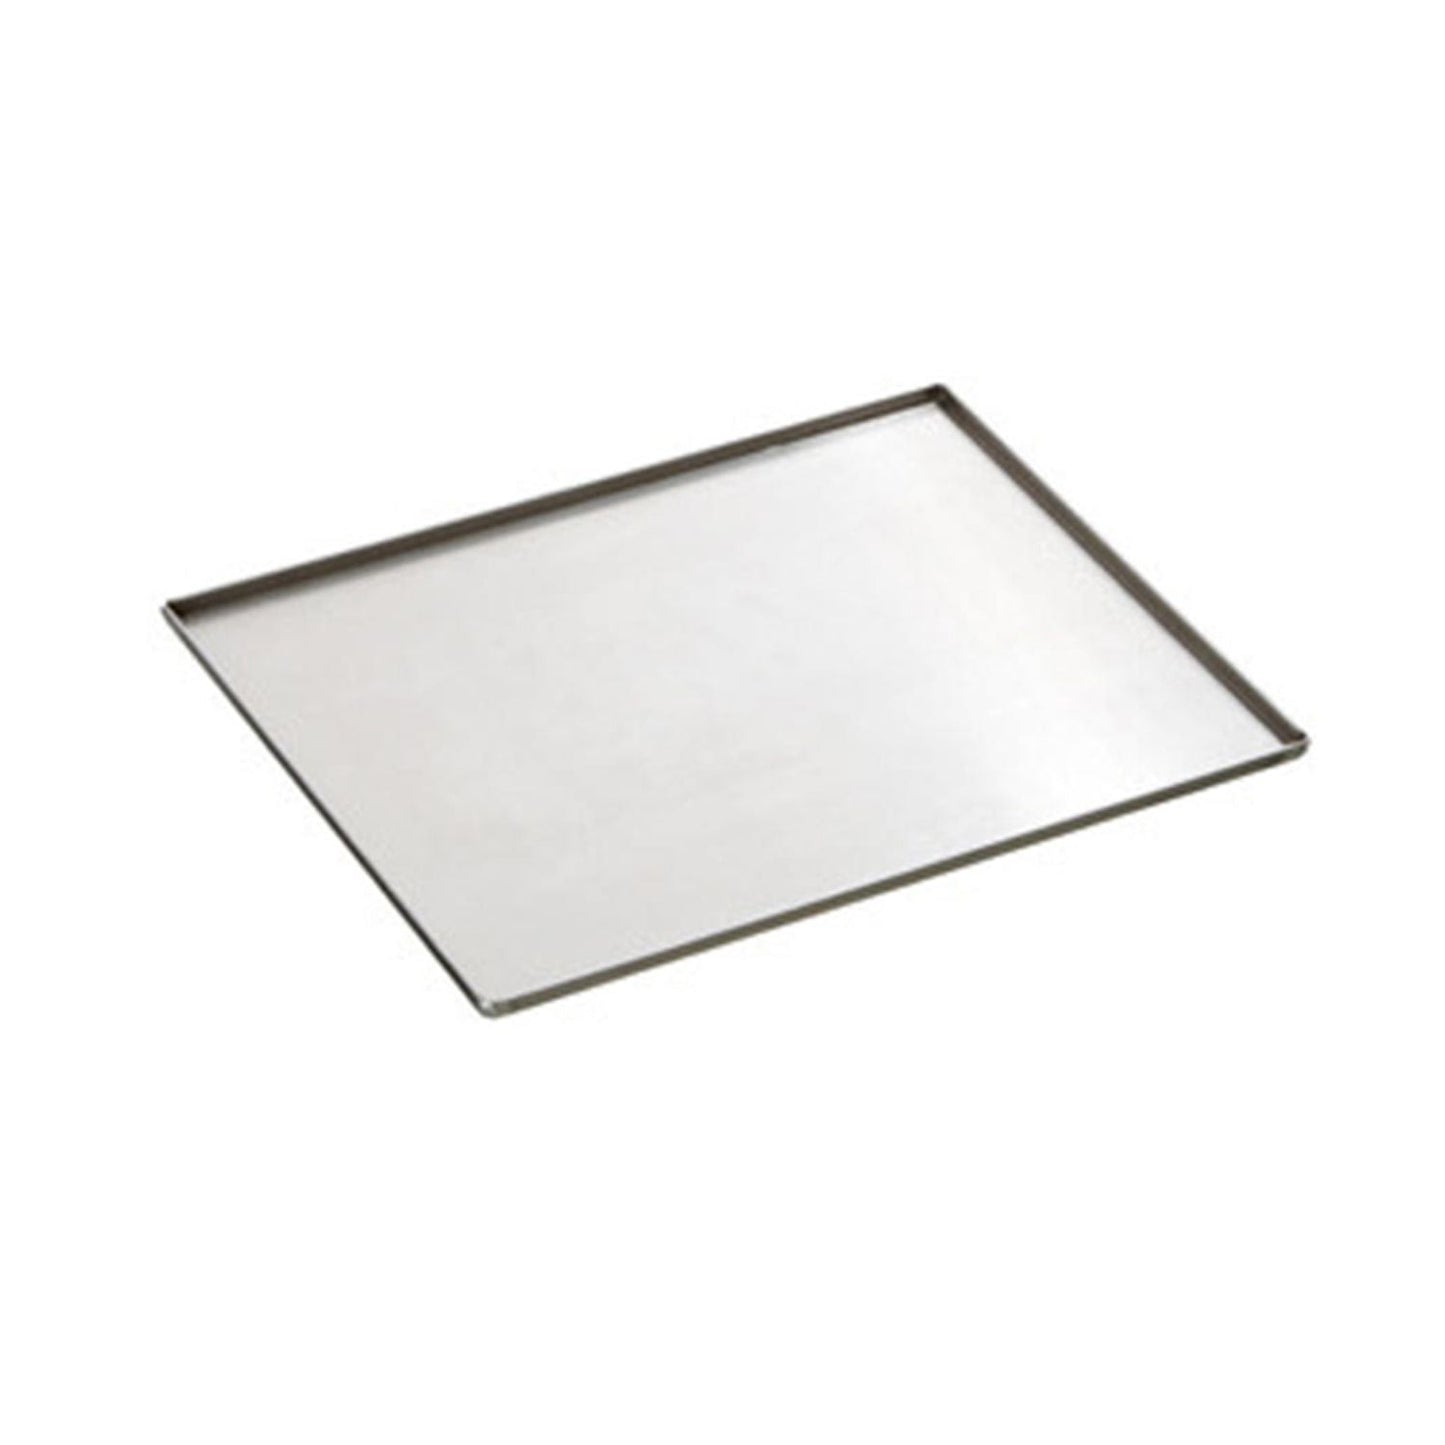 1 mm Stainless Steel Baking Tray - 300 x 200 x 25 mm - Mini